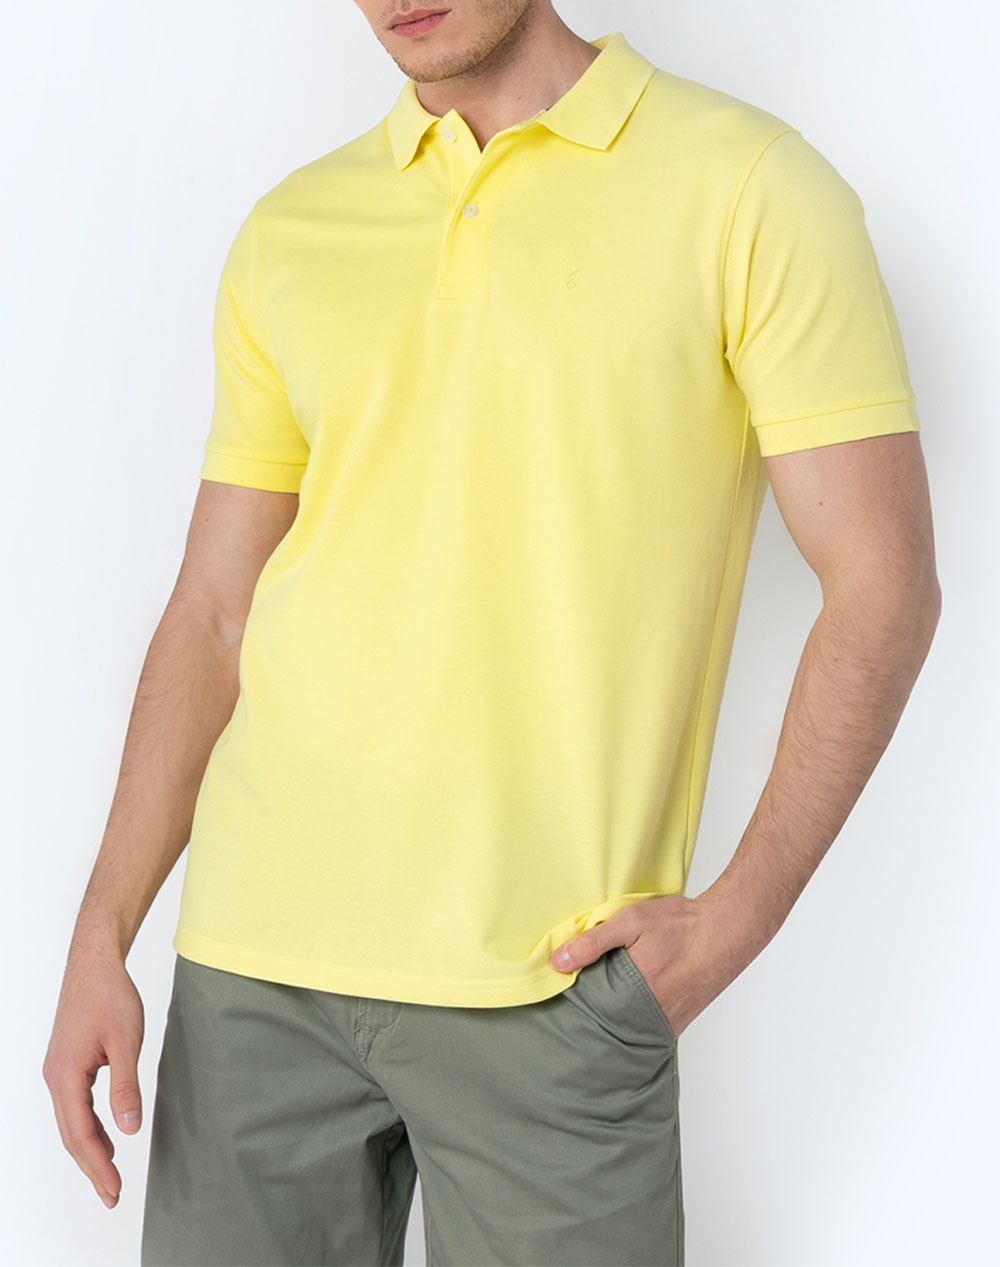 THE BOSTONIANS ΜΠΛΟΥΖΑ POLO PIQUE REGULAR FIT 3PS0001-LIGHT Yellow 3820ABOST3410092_XR30397